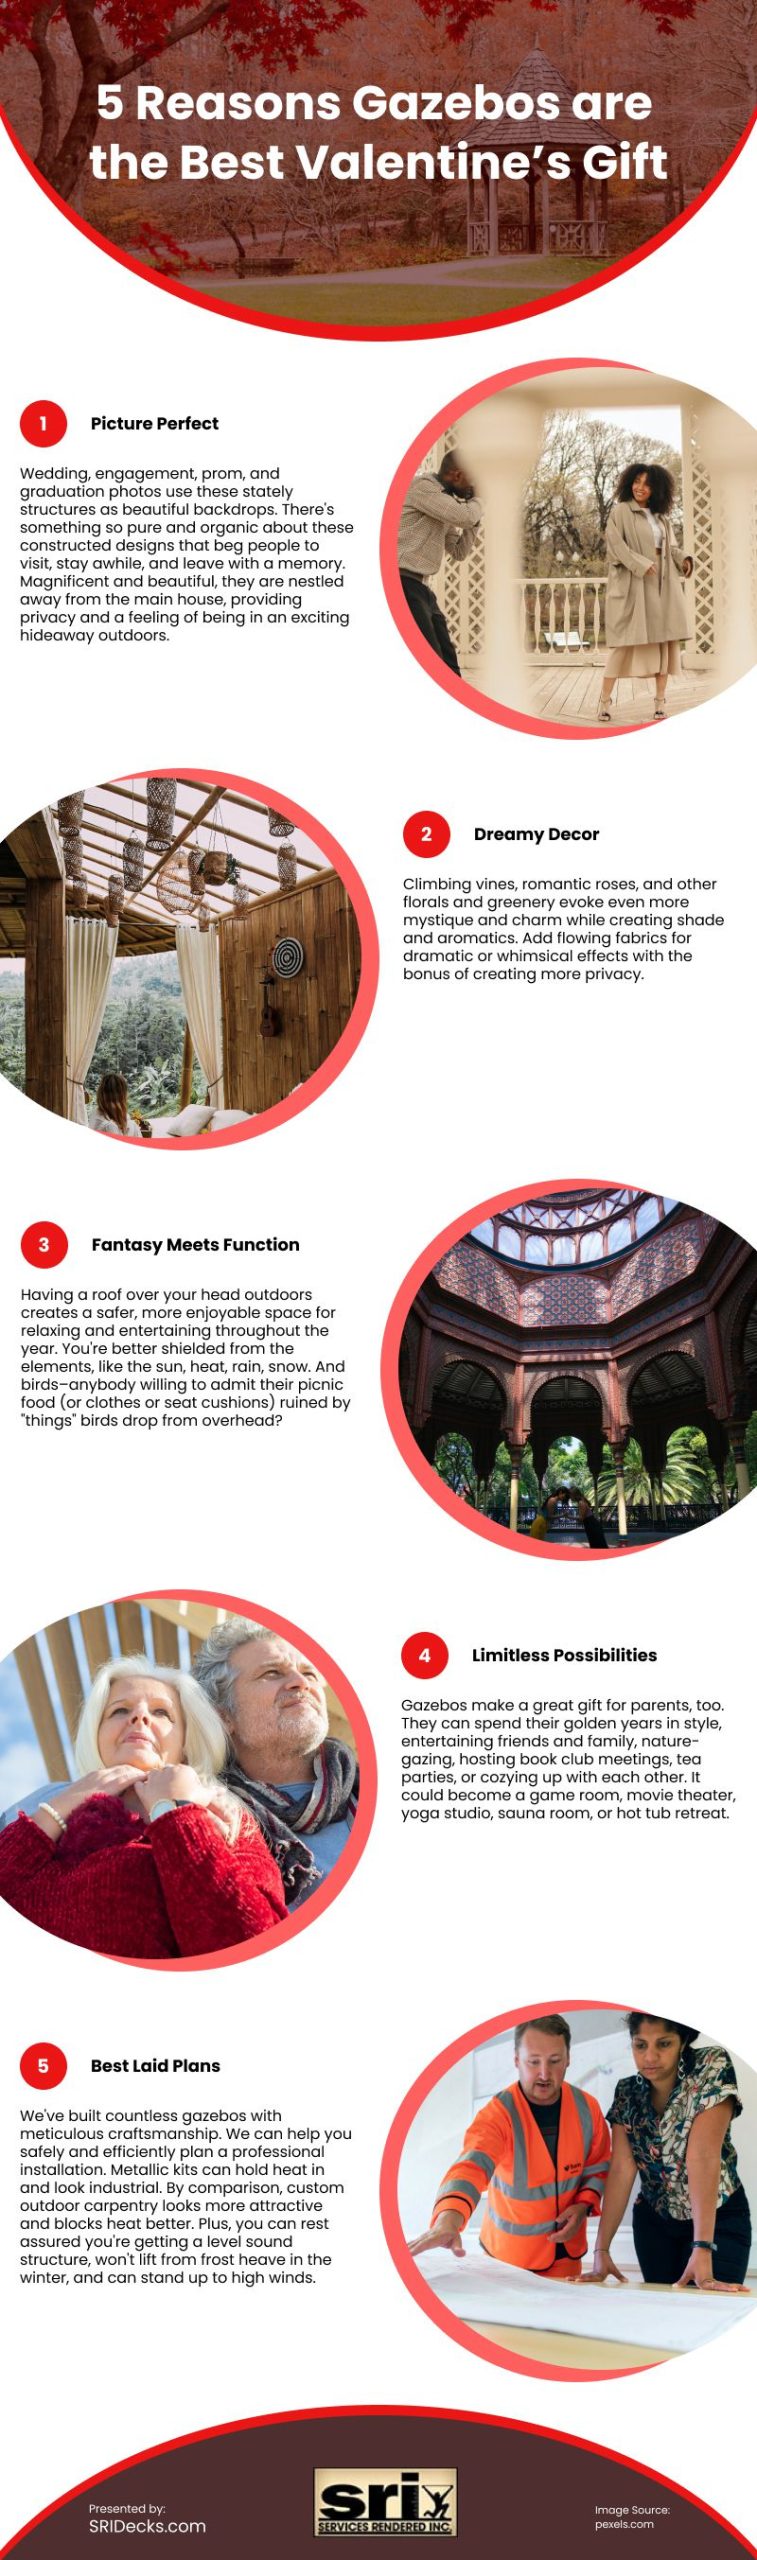 5 Reasons Gazebos are the Best Valentine's Gift Infographic